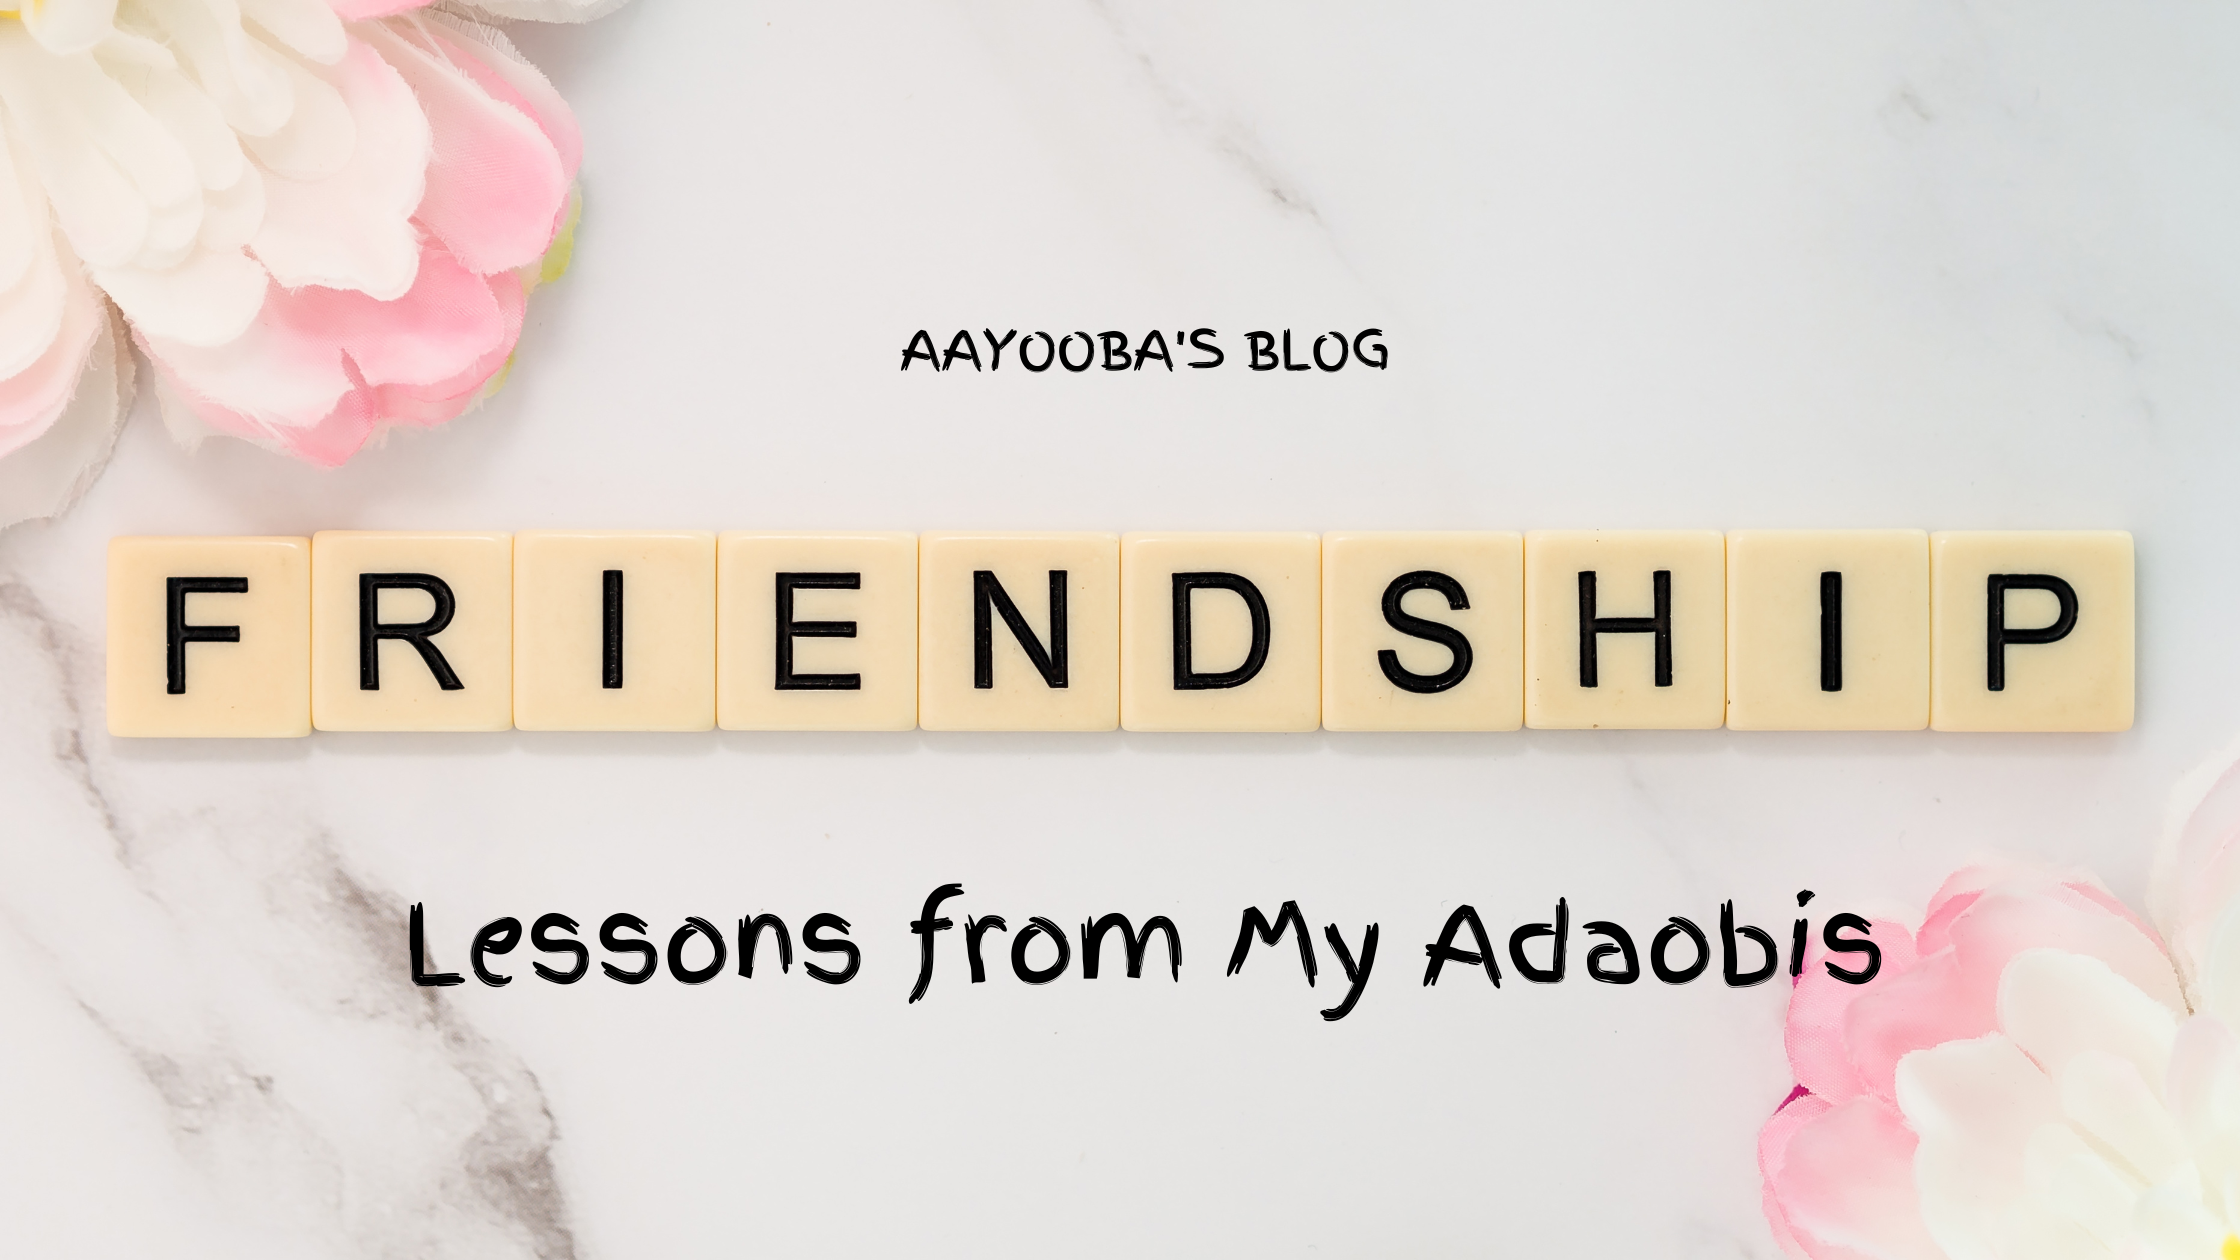 blog banner for post "On friendships: lessons from my adaobis" for Aayooba's blog